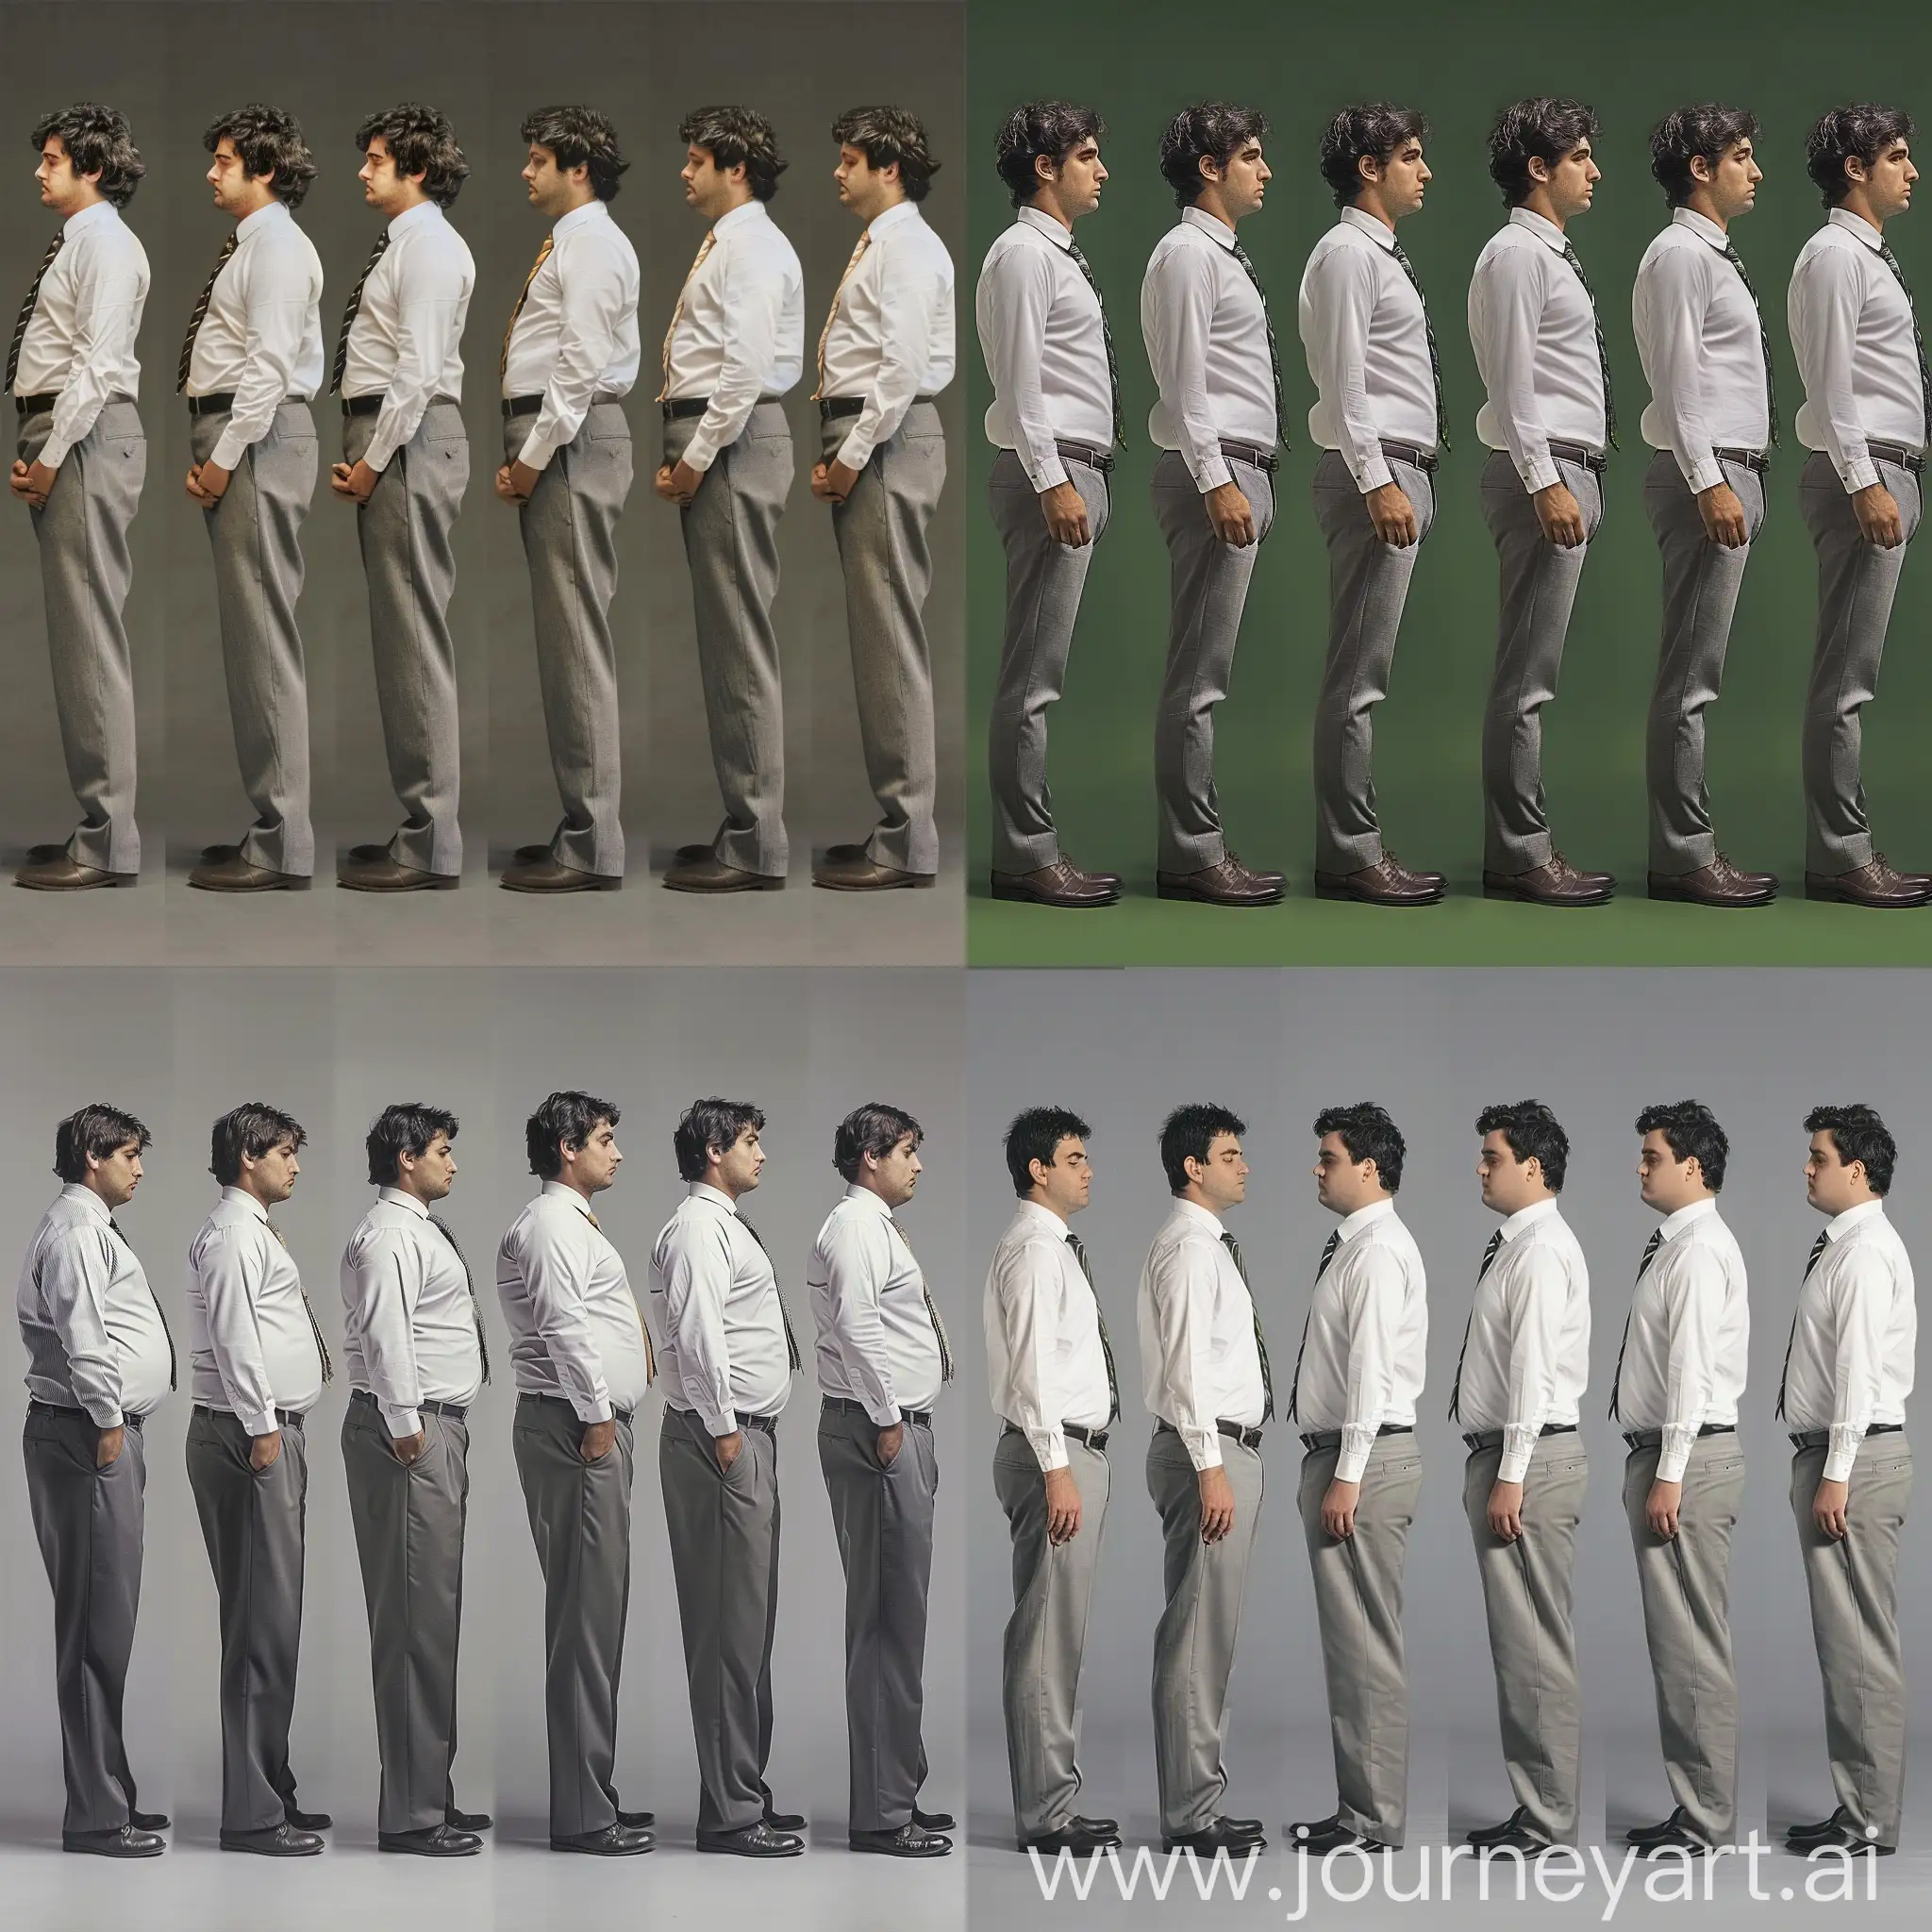 A series of 8 photos from the side showing the progression of weight gain of a 23 year old Italian businessman wearing a white dress shirt, tie, and gray slacks. He starts out fit. There is a clear progression of his body getting fatter. By the last photo he is visibly obese.